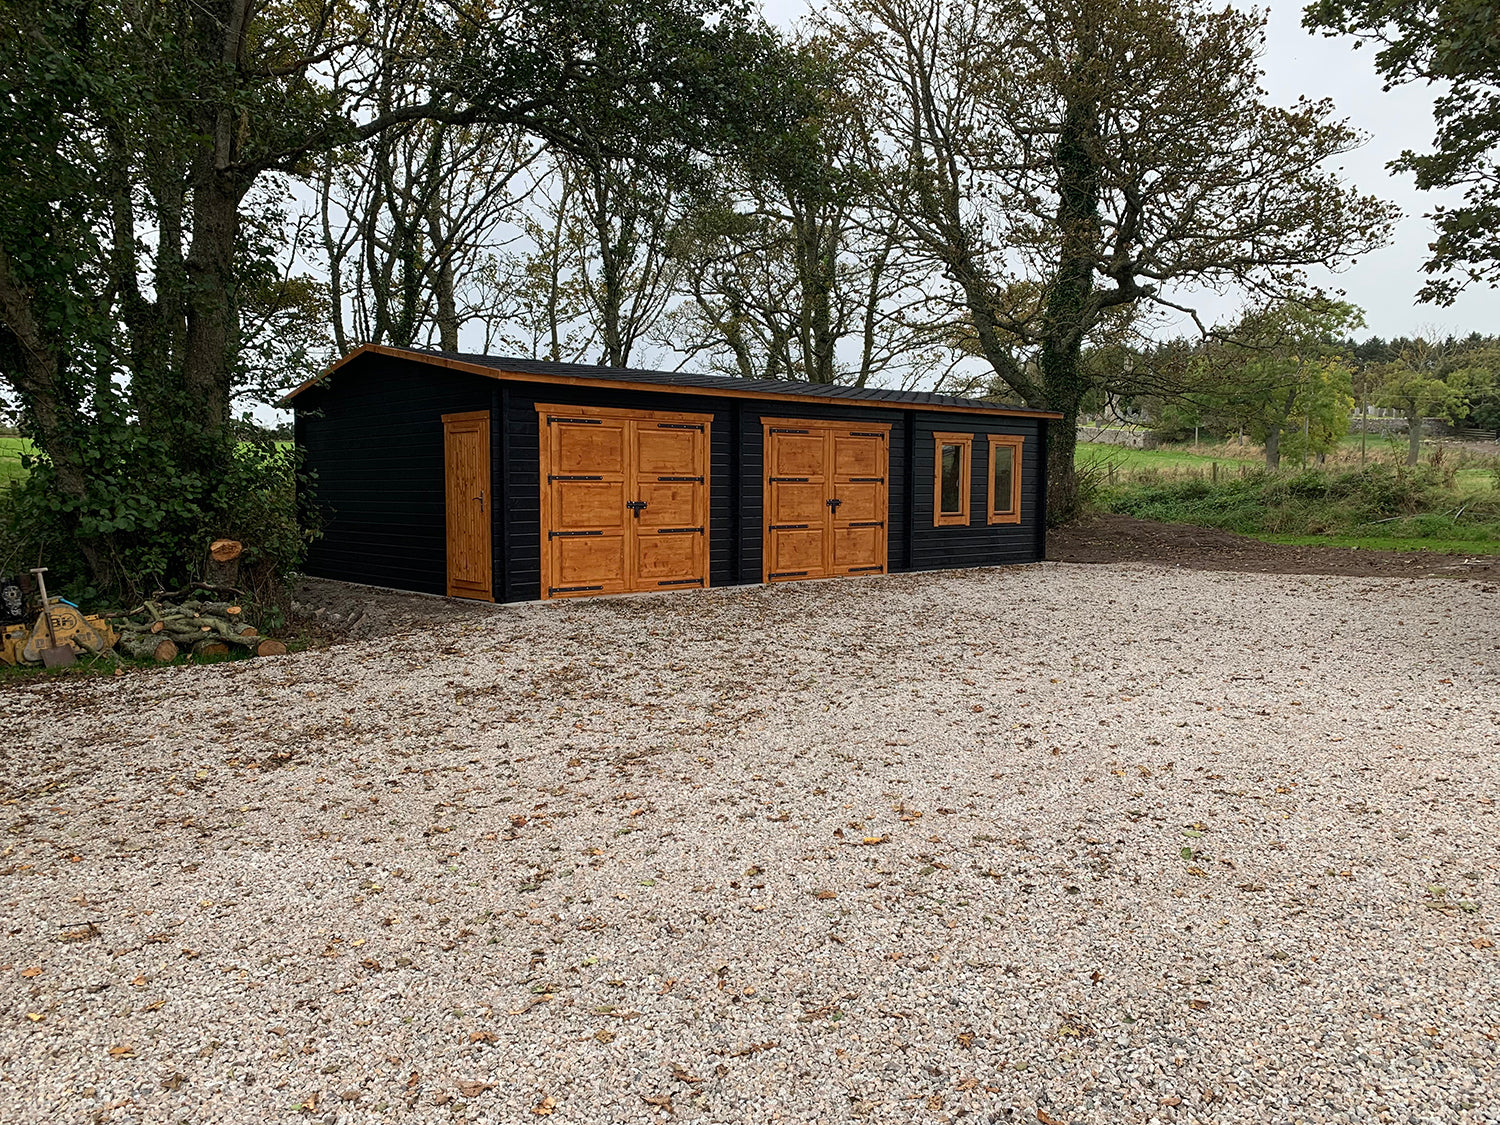 Timber Garages - Why are they so popular